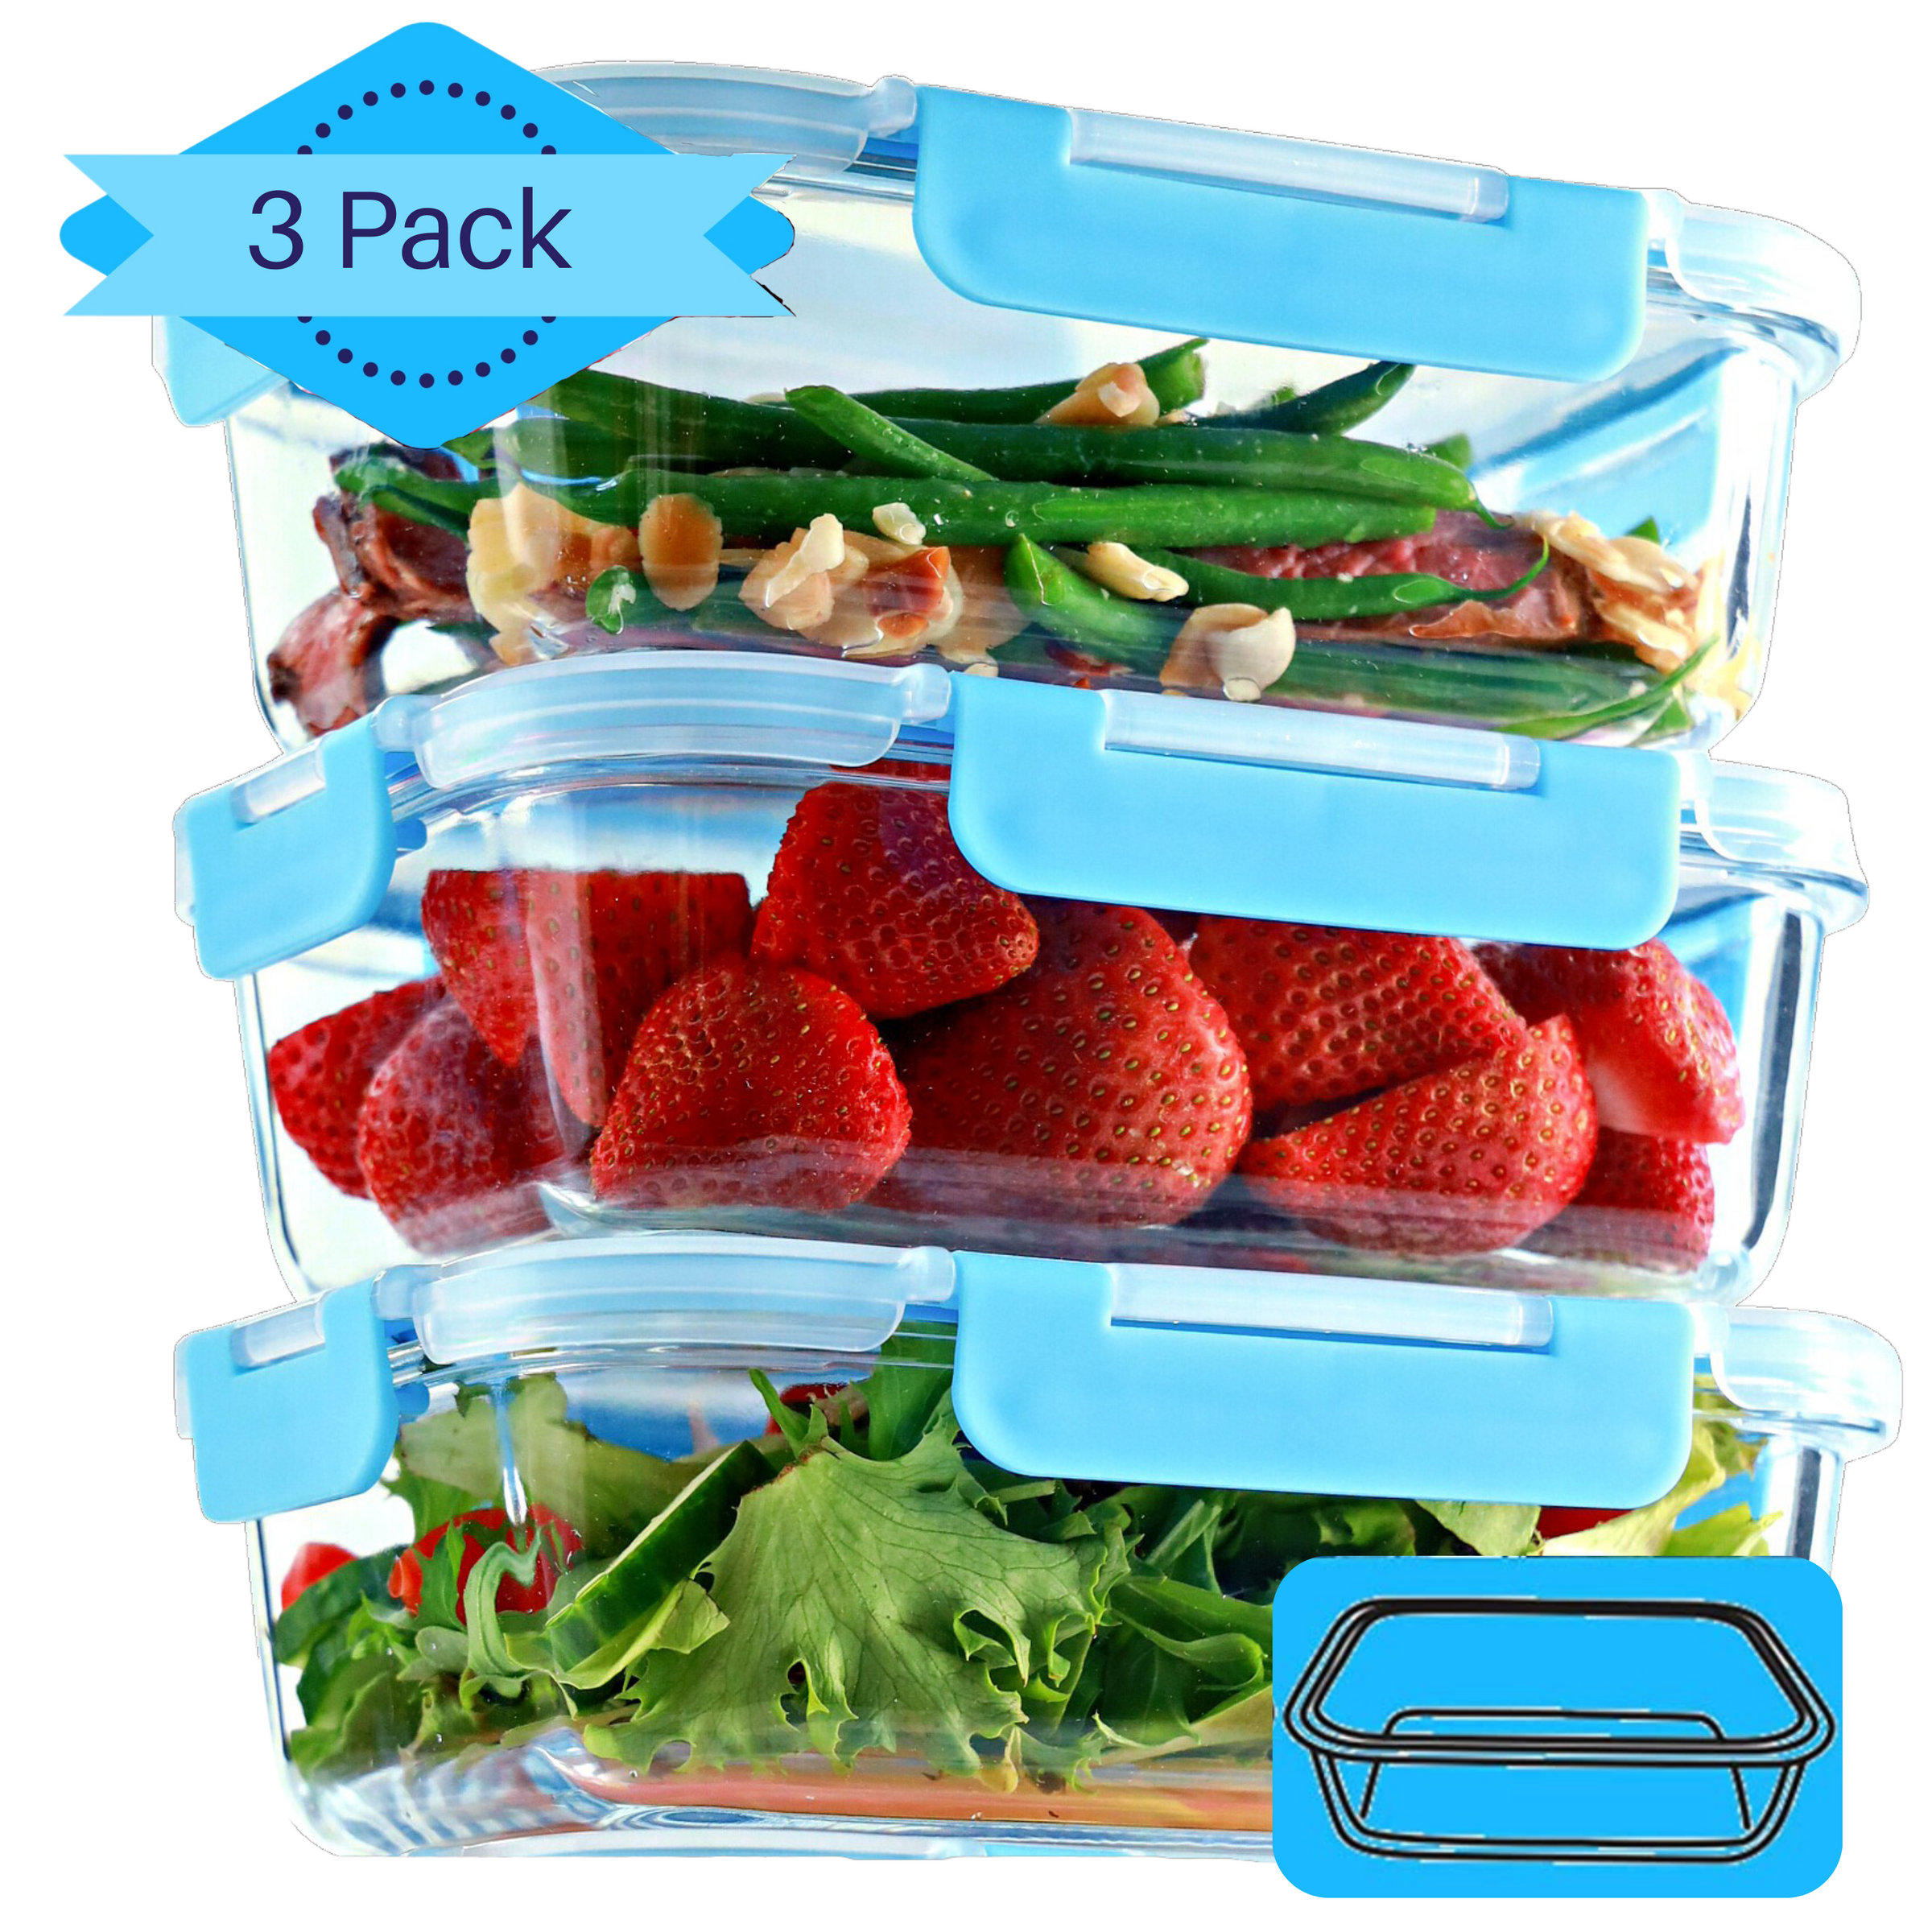 1 Compartment Glass Meal Prep Containers (3 Pack, 35 oz) - Glass